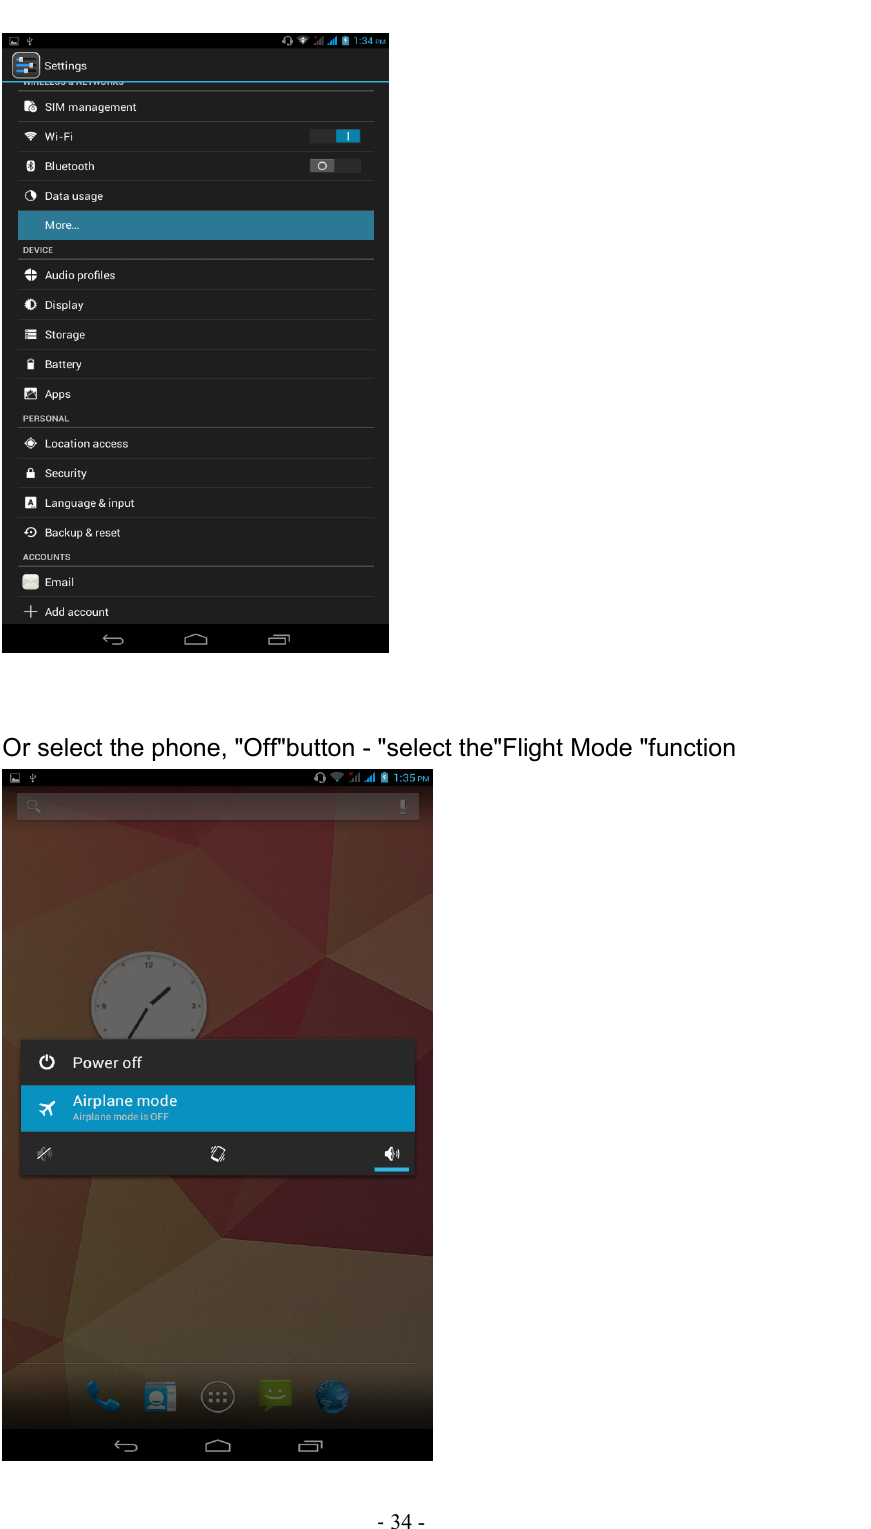                                                                                - 34 -    Or select the phone, &quot;Off&quot;button - &quot;select the&quot;Flight Mode &quot;function  